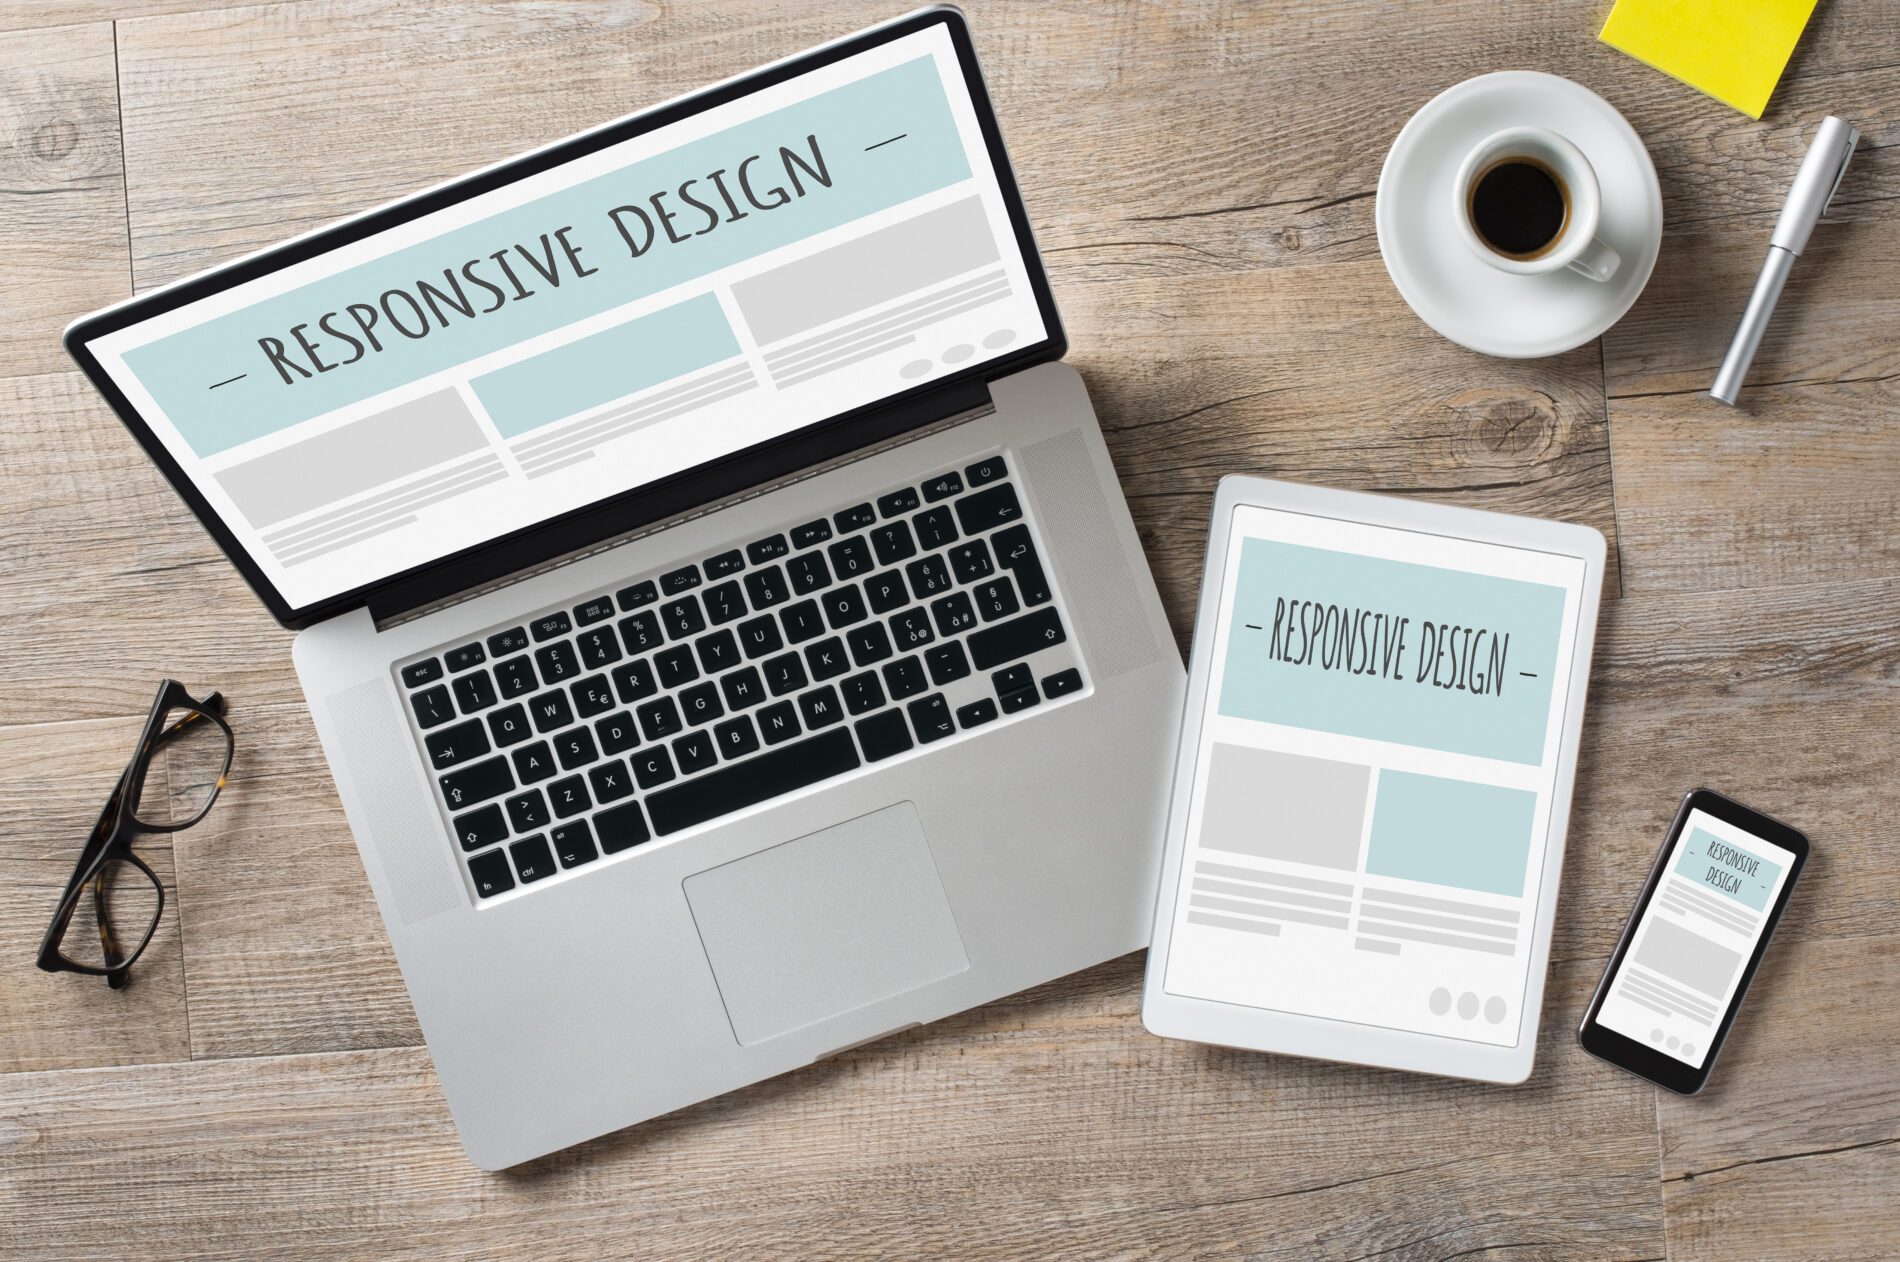 Web Design 101 What to Expect From Responsive Web Design Services